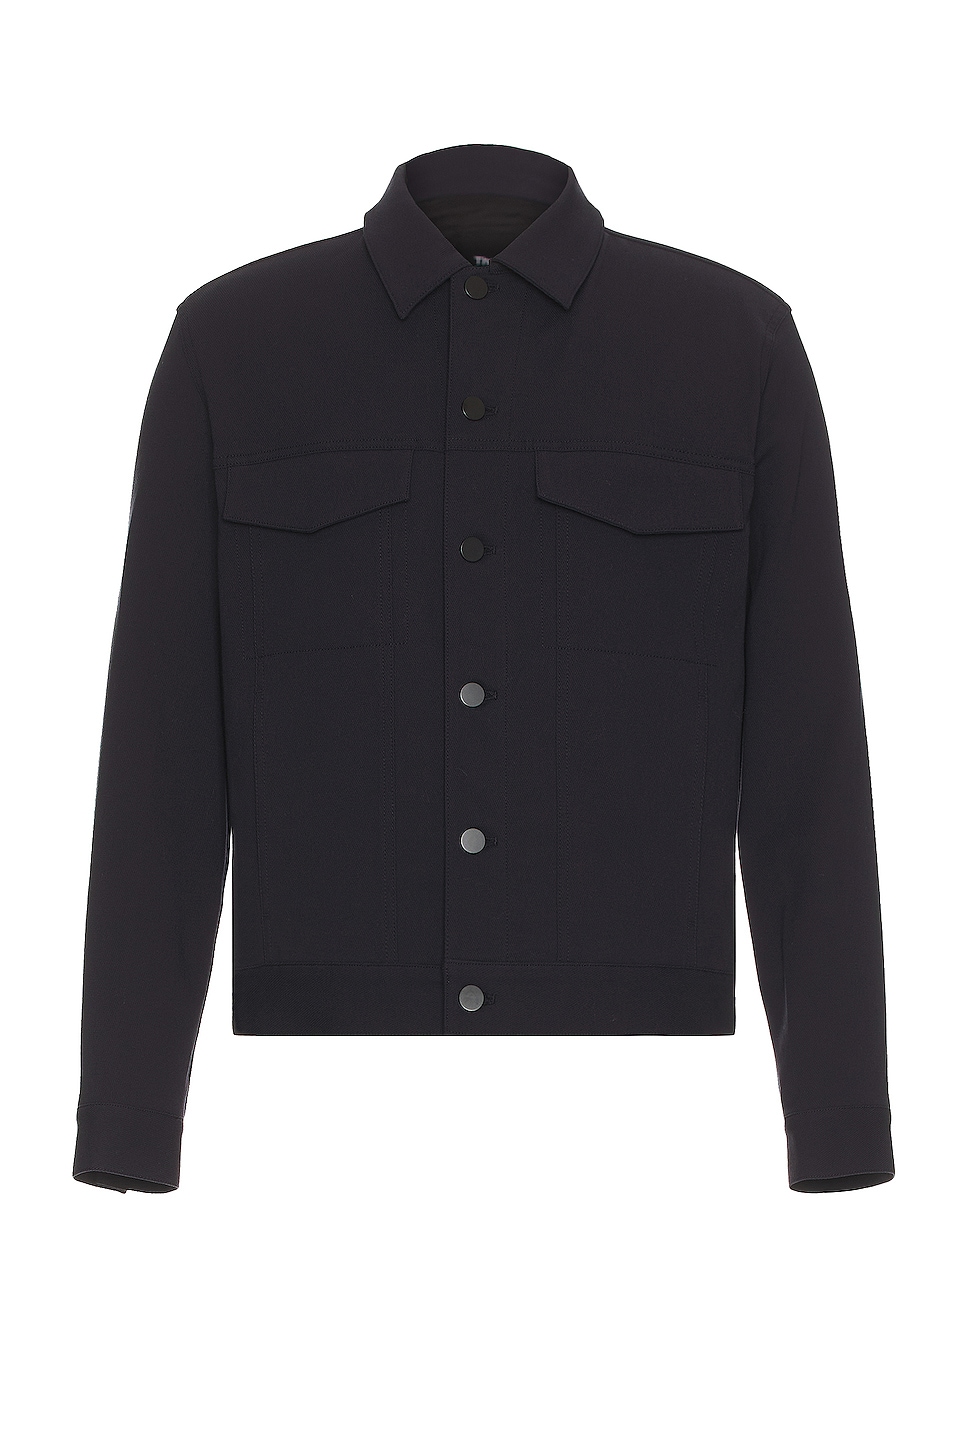 Image 1 of Theory River Neoteric Twill Jacket in DARK NAVY